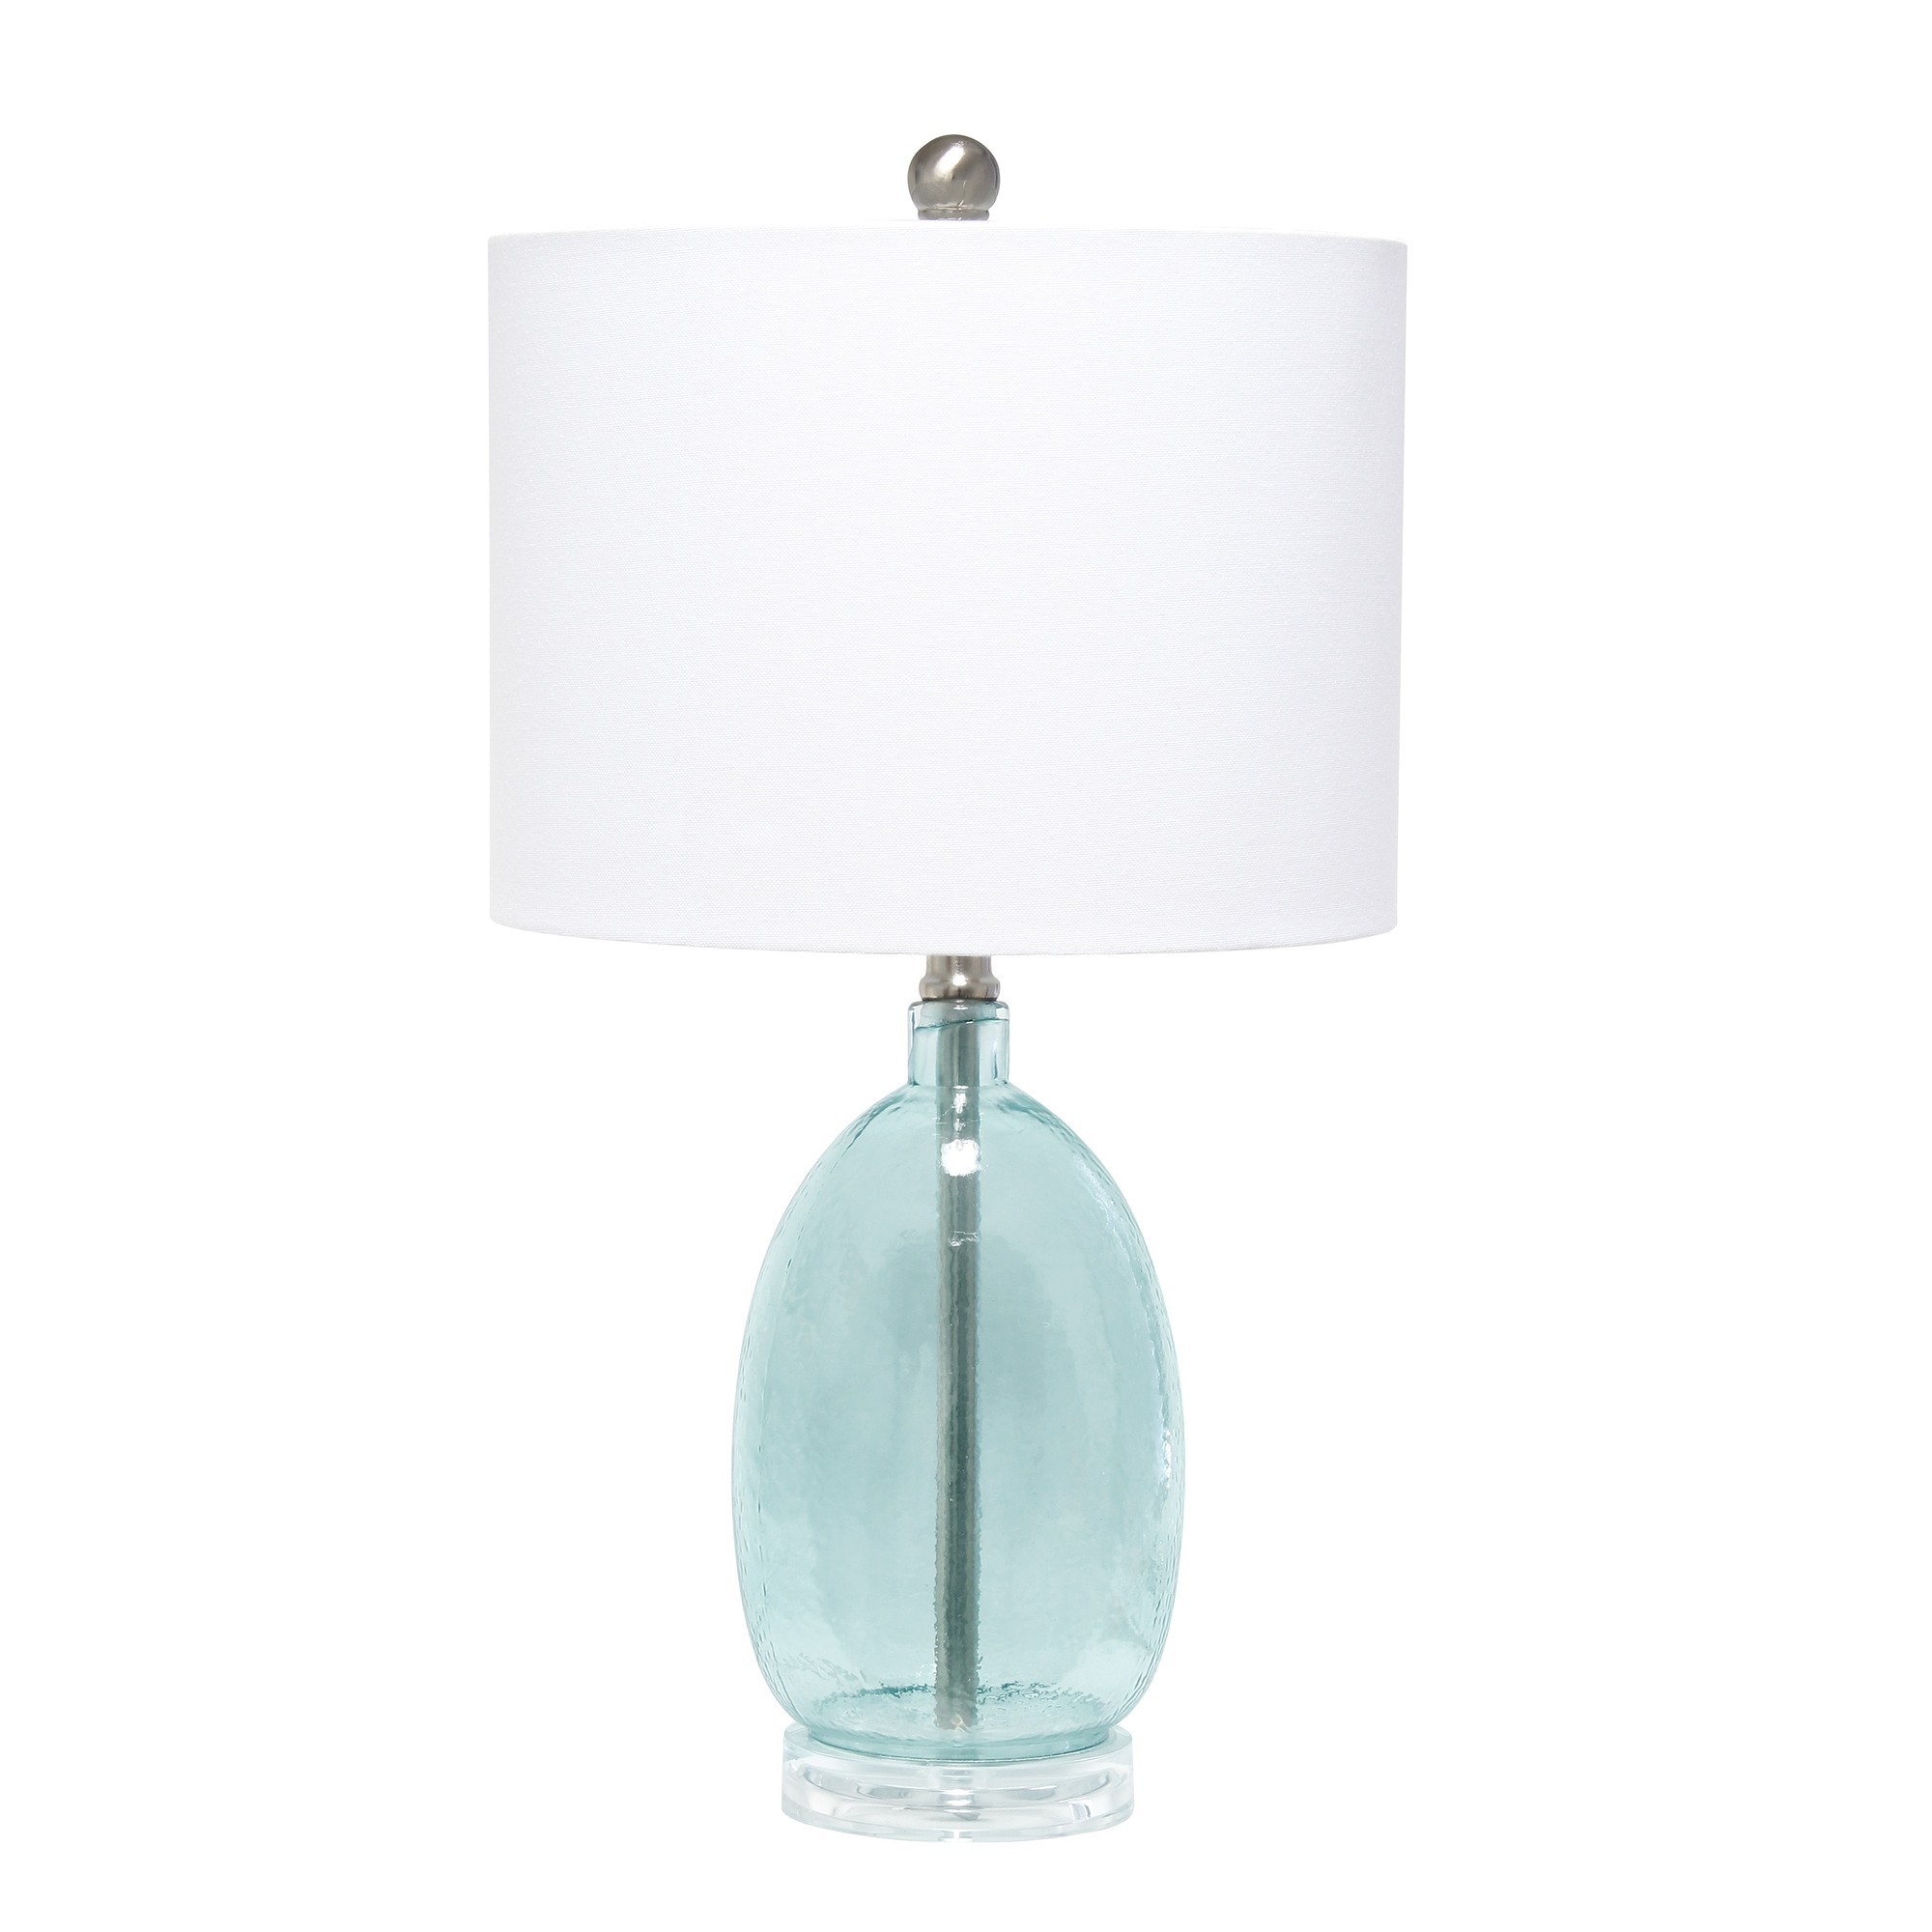  Lalia Home Oval Glass Table Lamp with White Drum Shade, Clear Blue